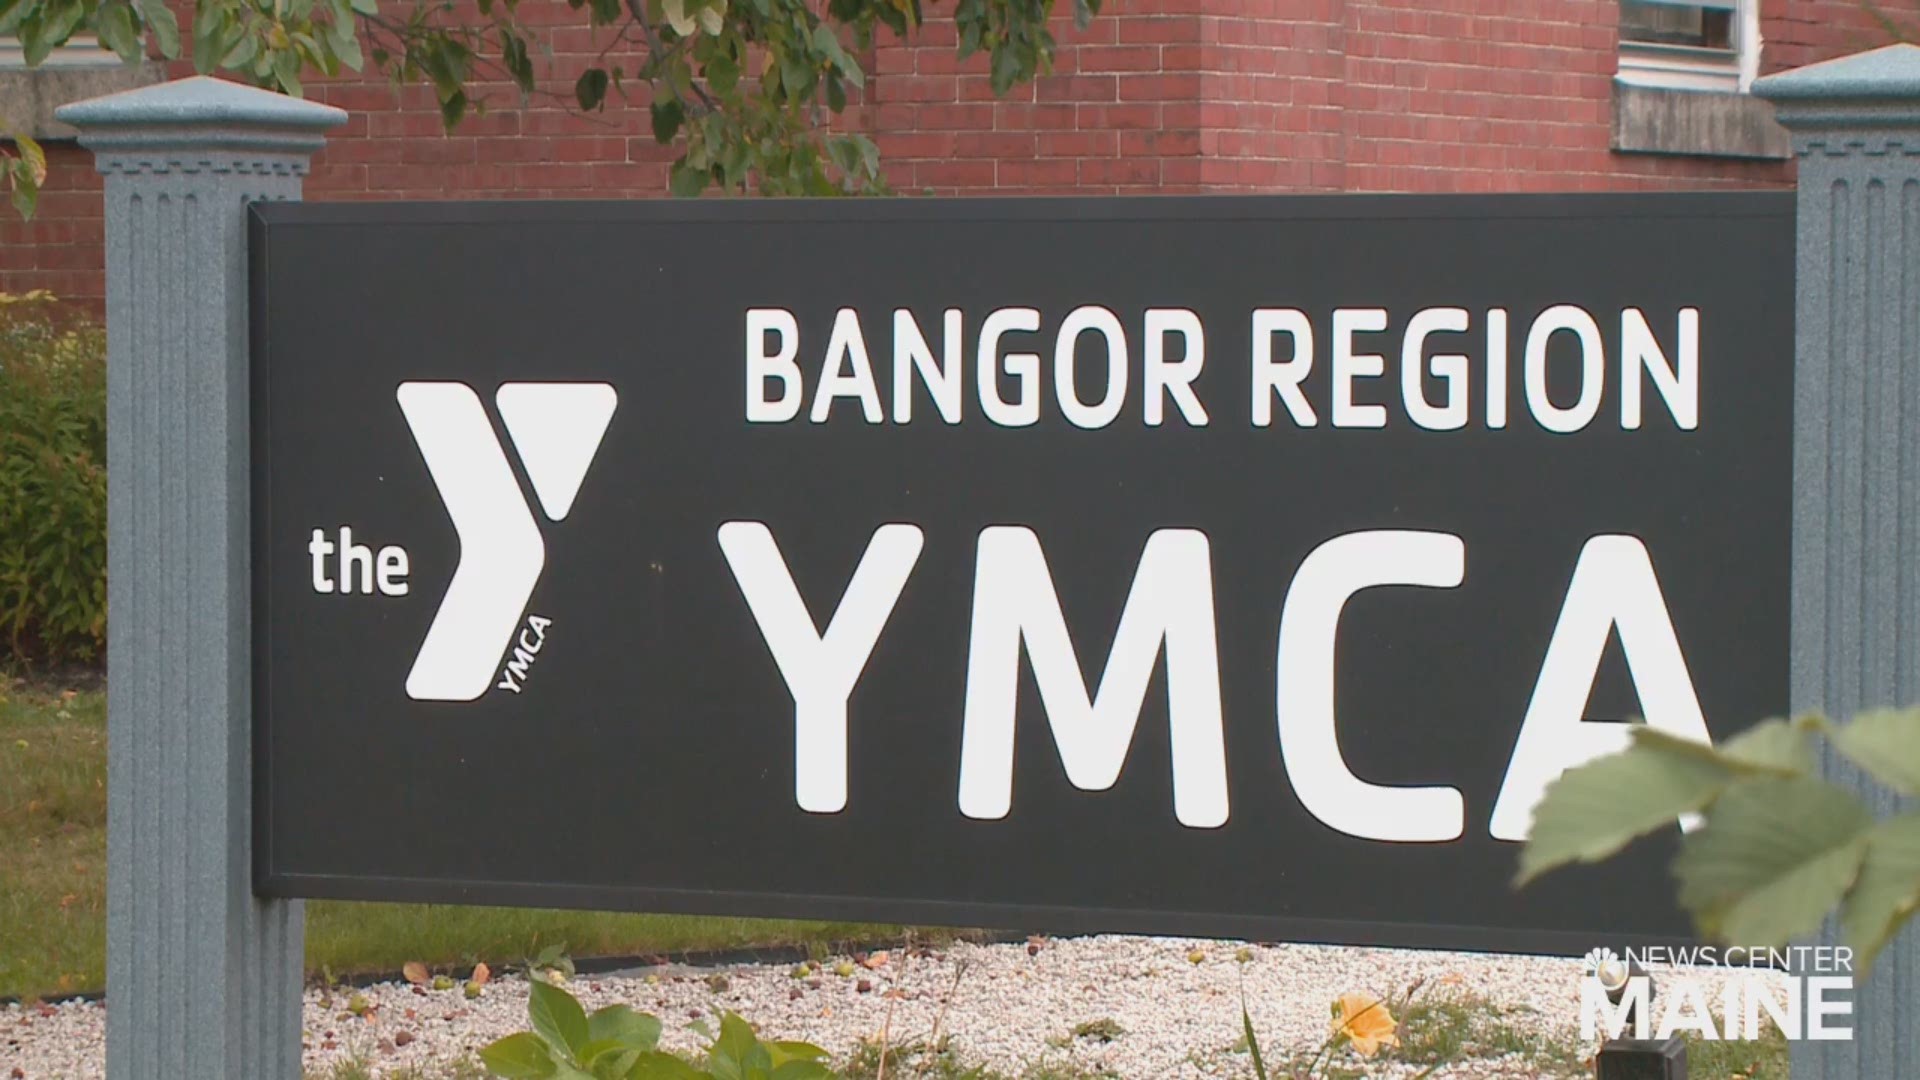 Teens in the Bangor area will new, positive place to hang